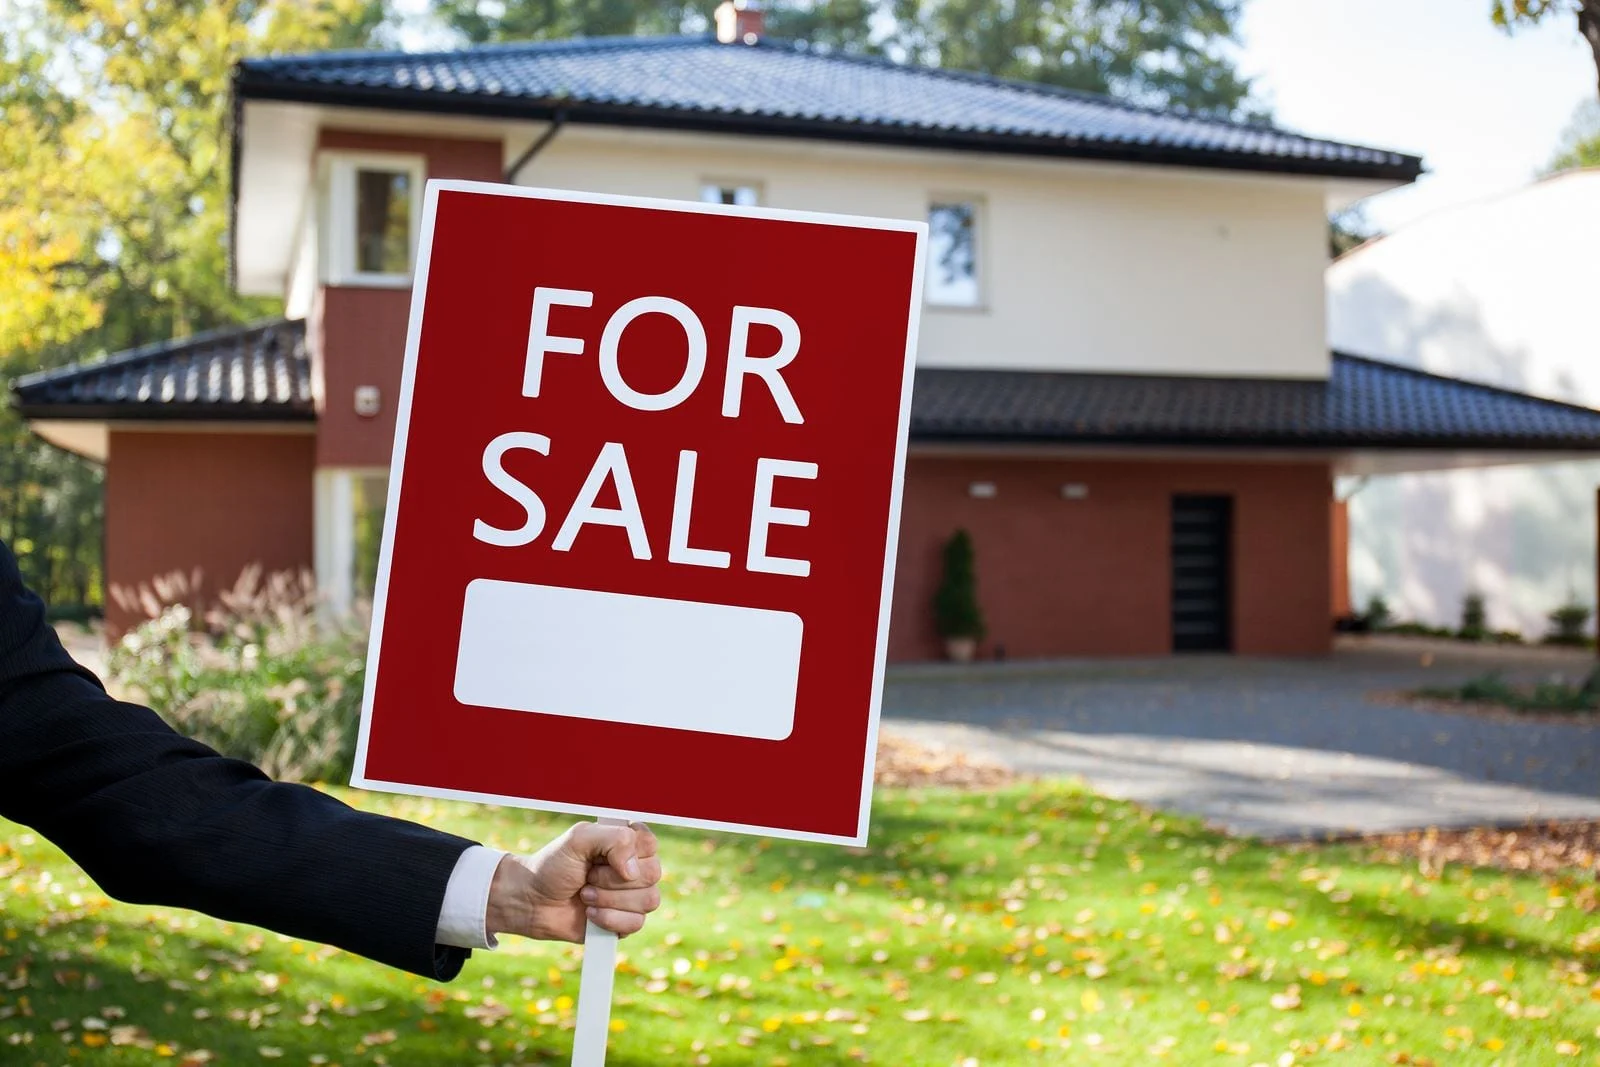 What to consider before selling your house?